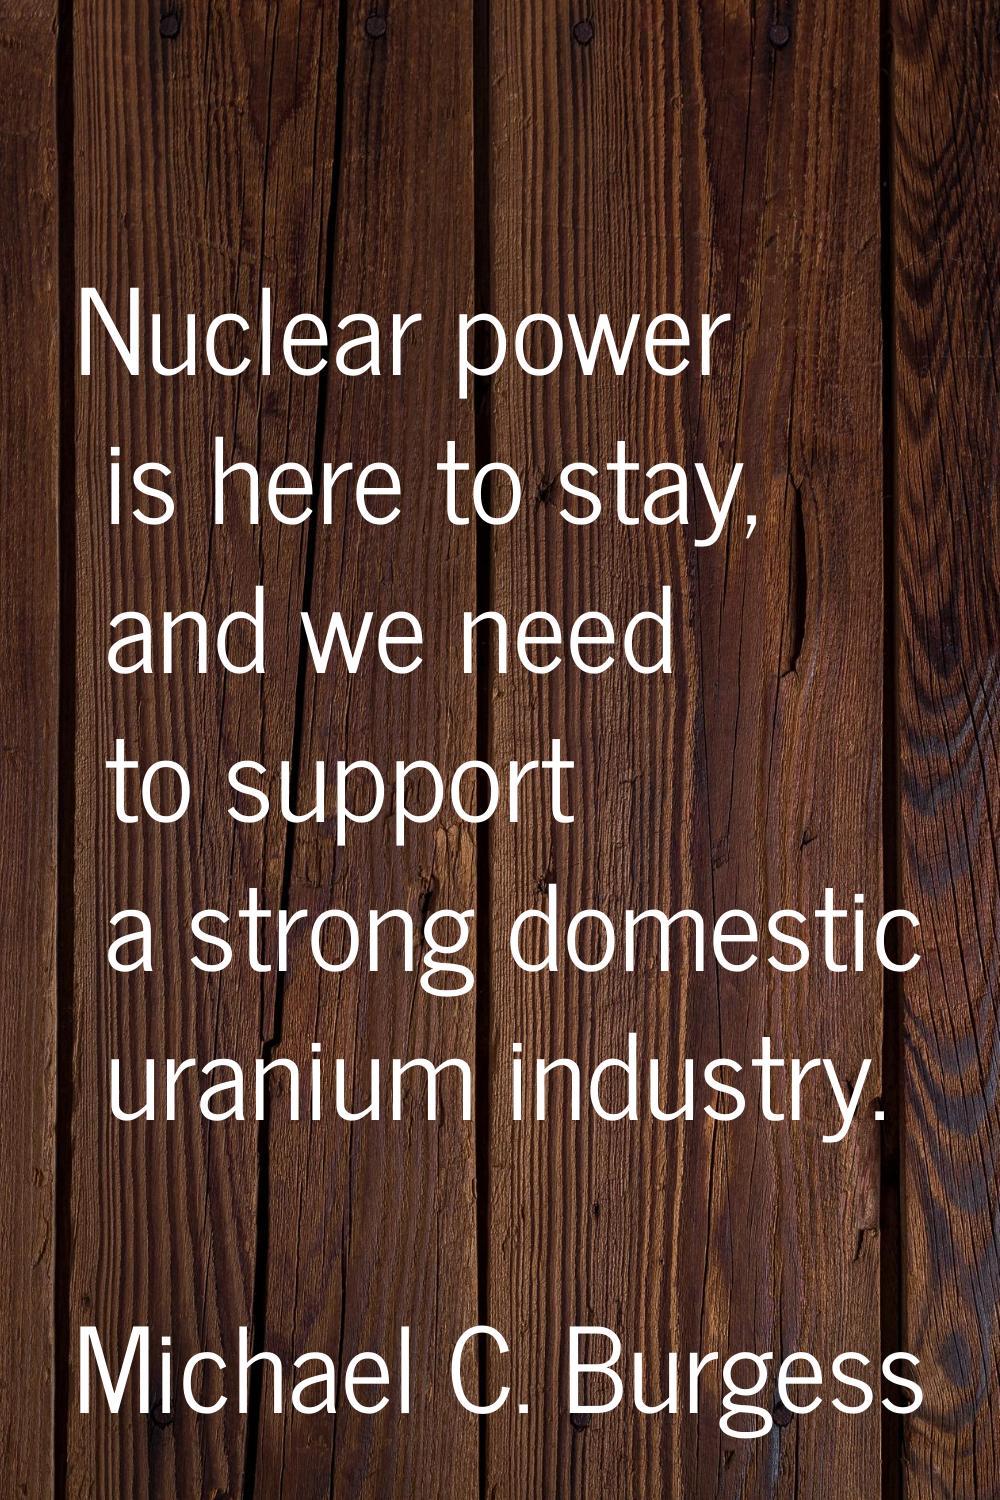 Nuclear power is here to stay, and we need to support a strong domestic uranium industry.